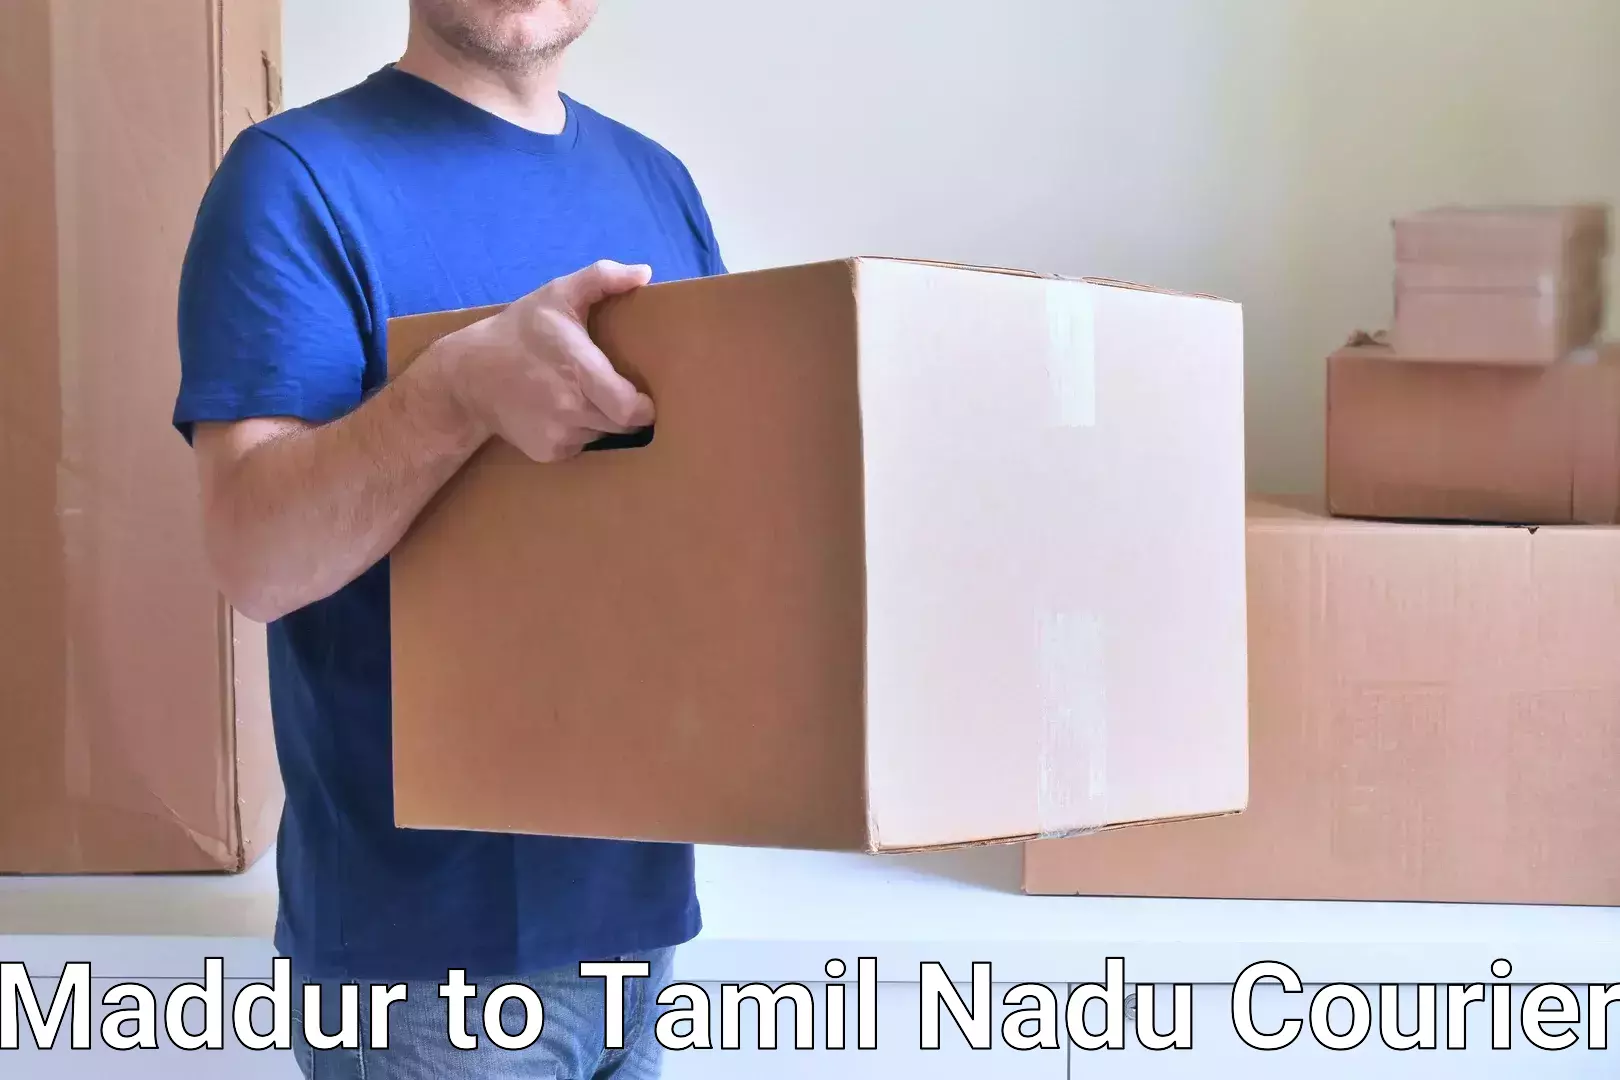 Fast delivery service Maddur to Mettur